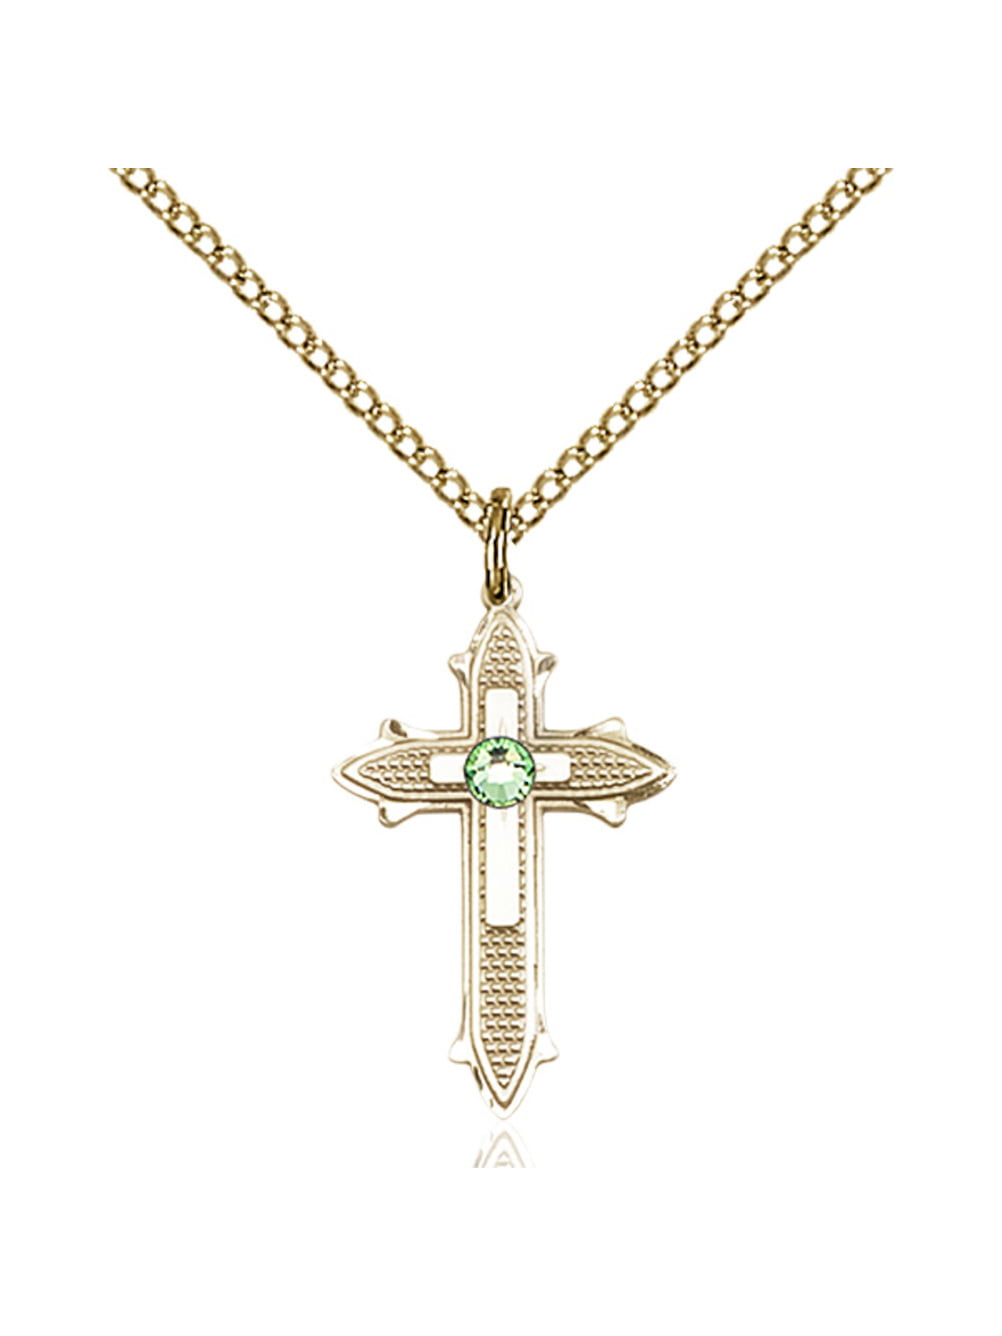 14kt Gold Cross on Cross Medal with 3mm Peridot bead 7/8 X 1/2 